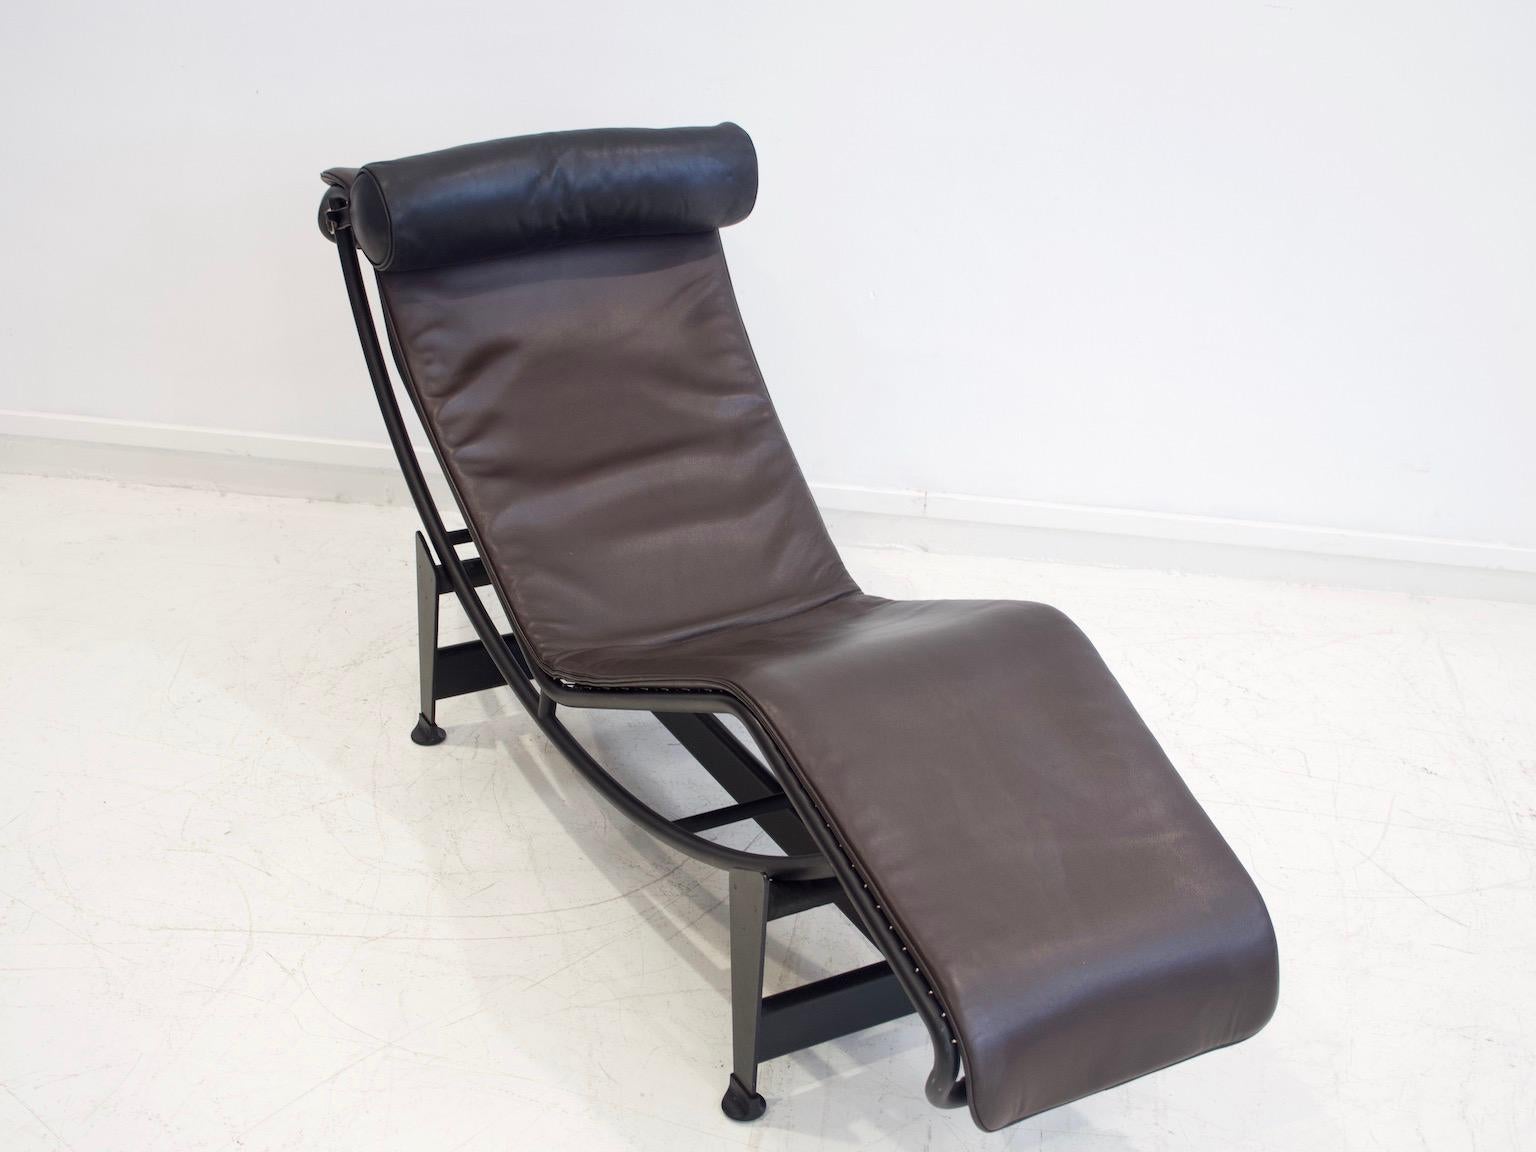 Painted Cassina Lounger LC4 by Le Corbusier, Charlotte Perriand and Pierre Jeanneret For Sale